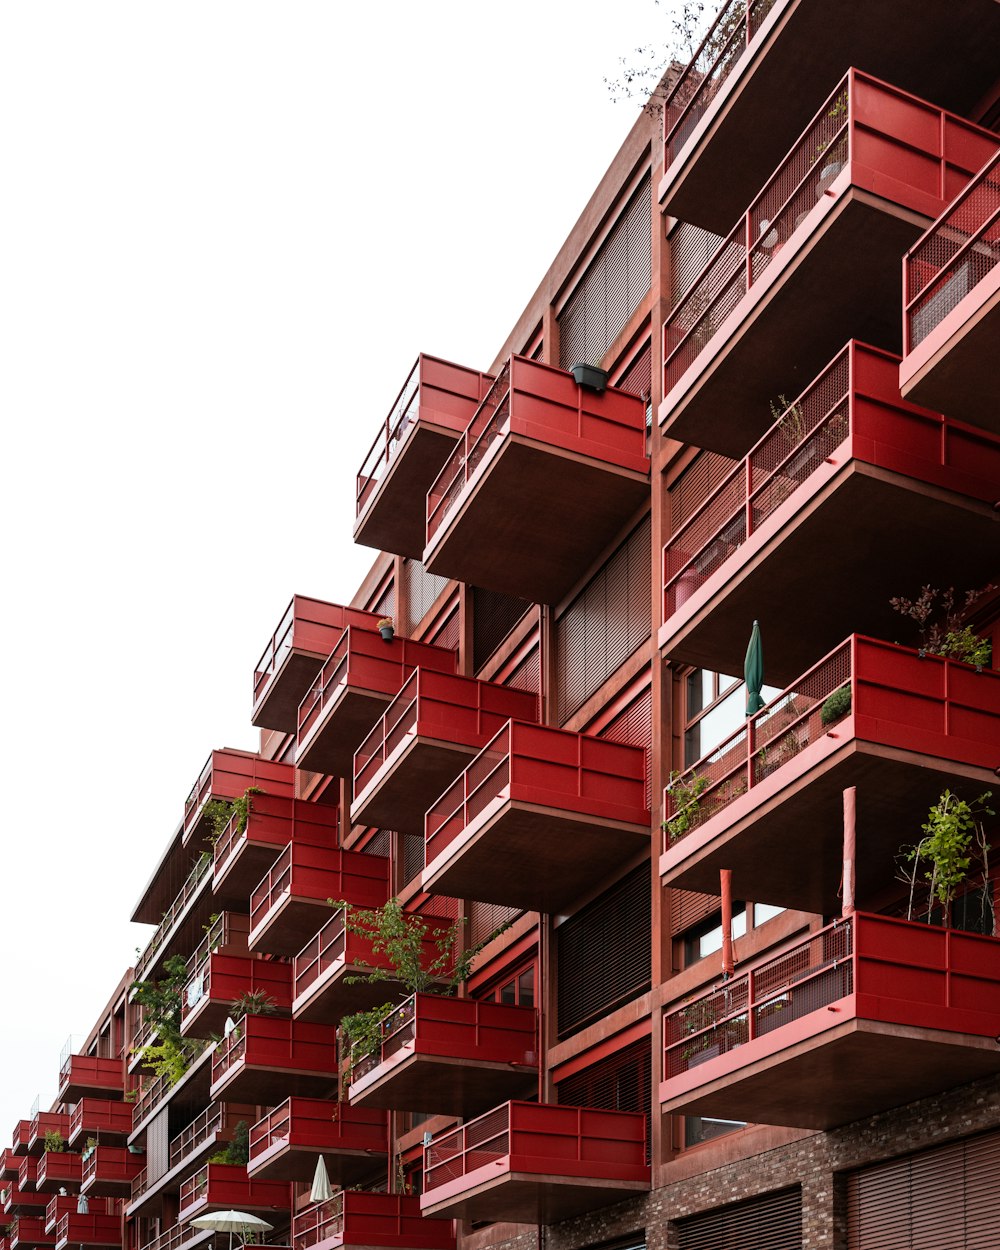 a red building with balconies and plants on the balconies